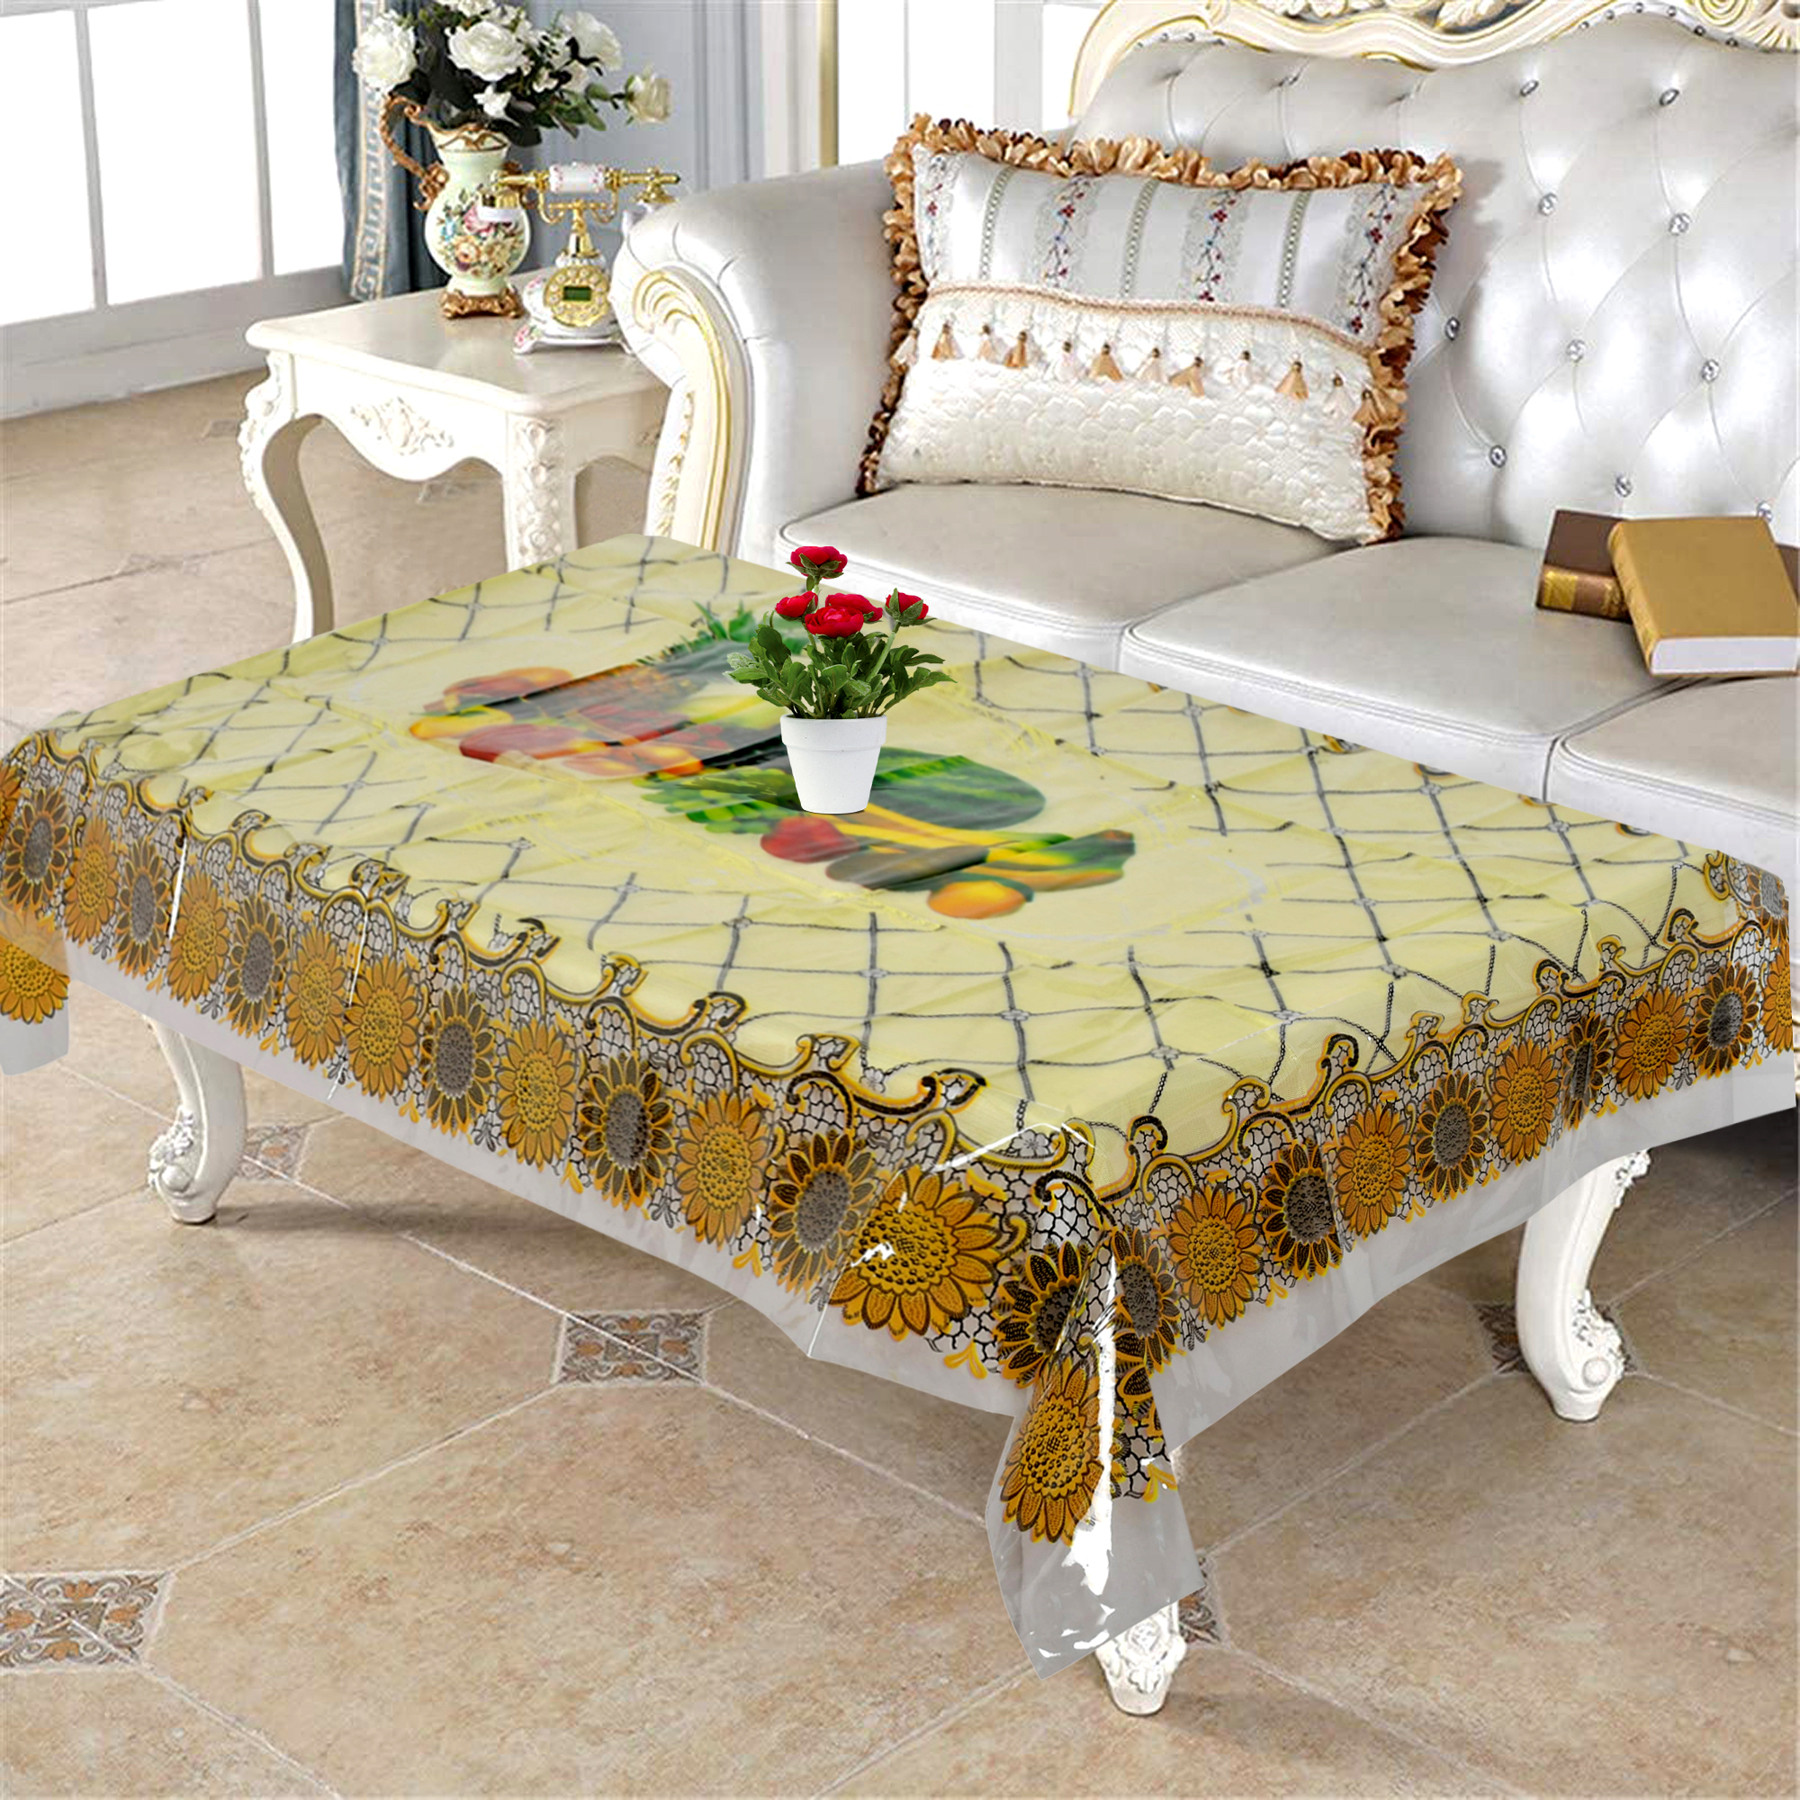 Kuber Industries Fruits Printed PVC 4 Seater Center Table Cover 40